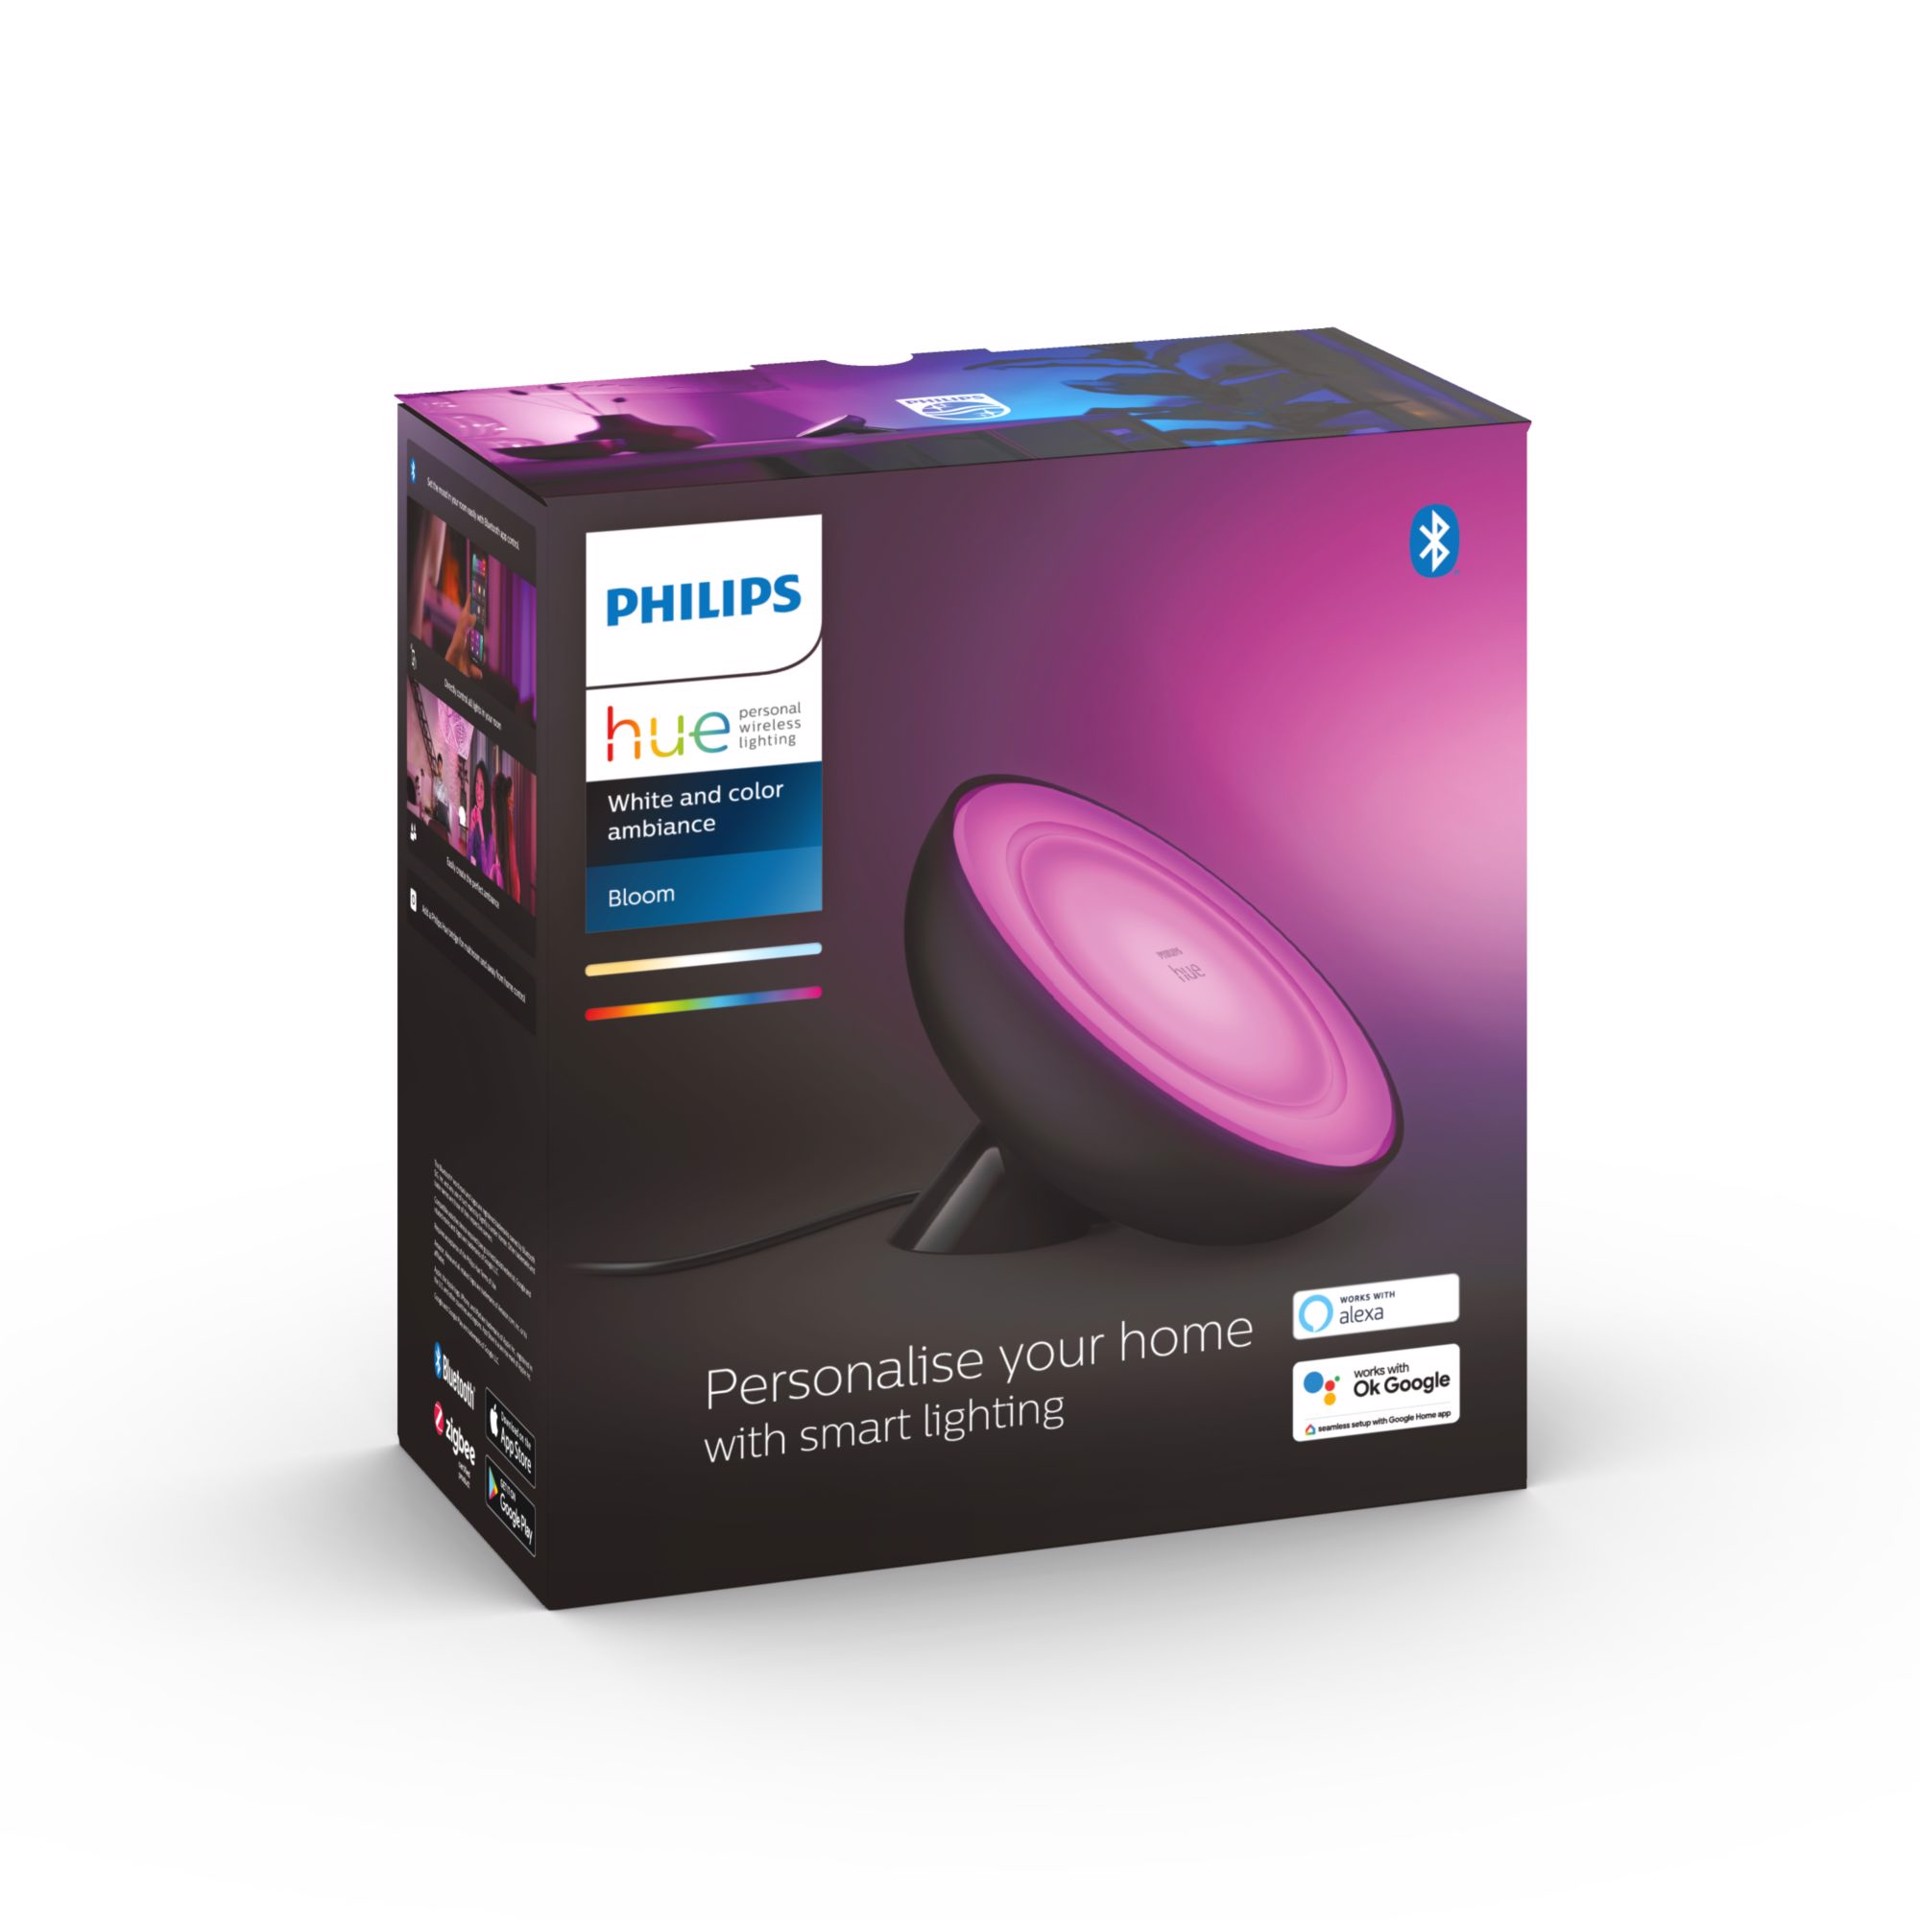 Philips by Signify Philips Hue White and Color ambiance Bloom Lampada Smart  da tavolo Nera, Domotica in Offerta su Stay On